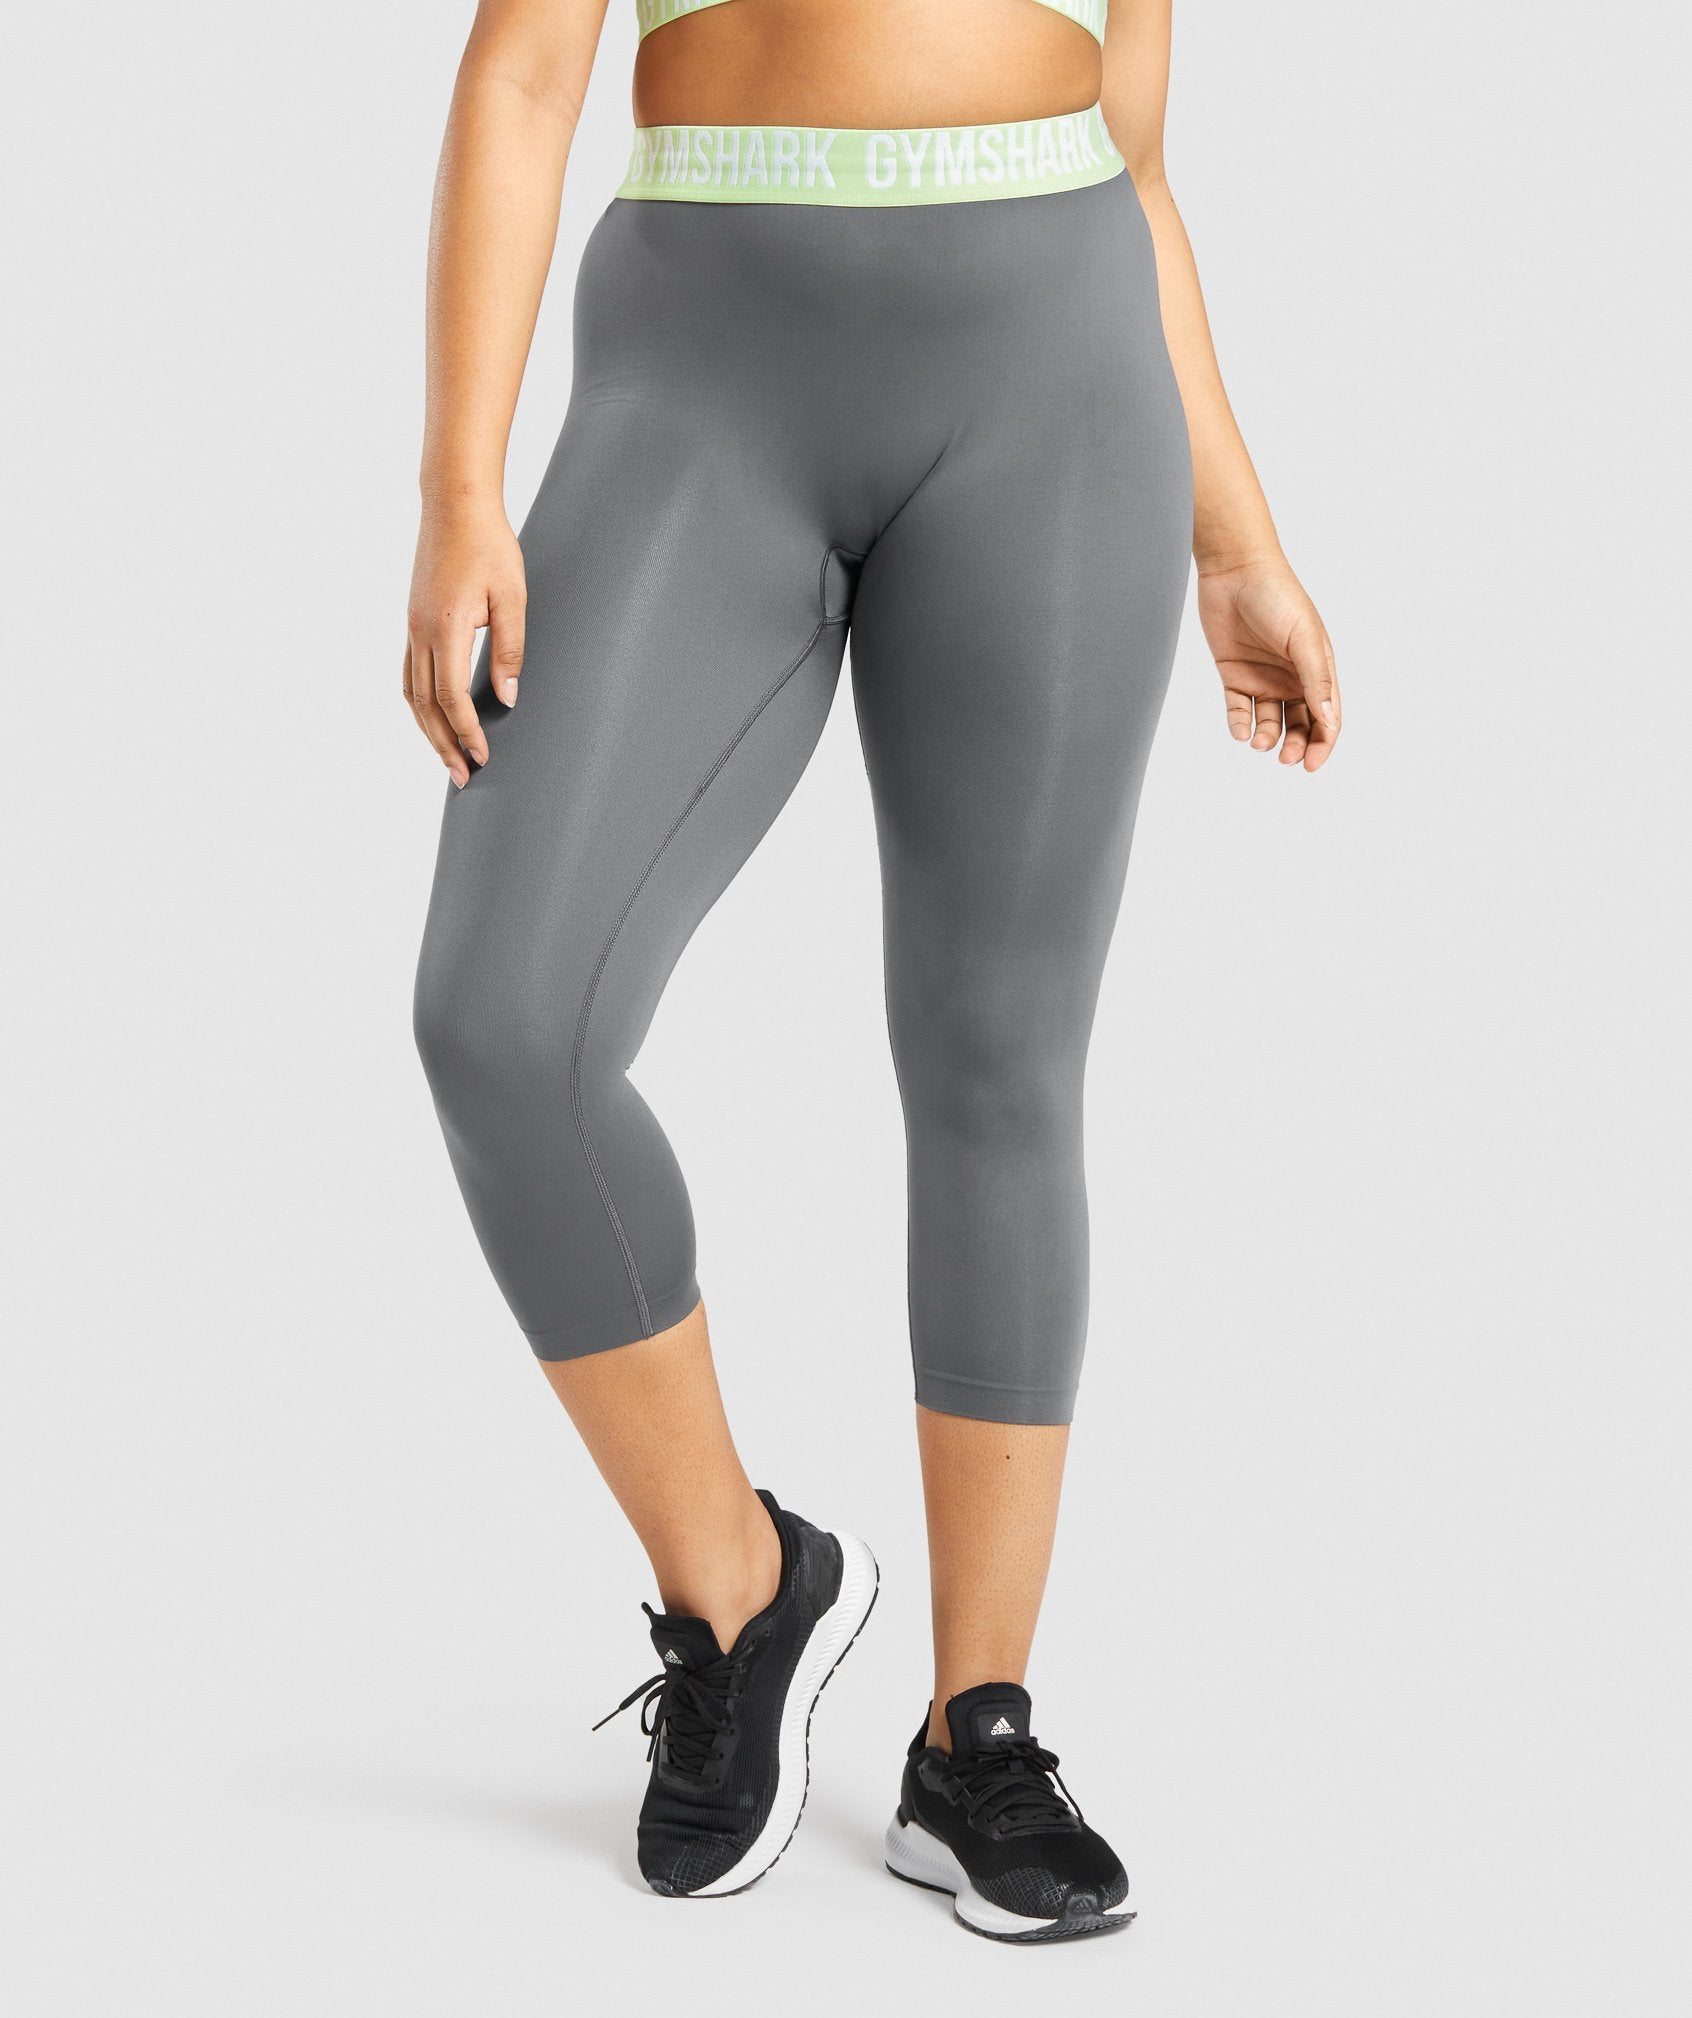 Gymshark Fit Seamless Leggings – Charcoal Low rise Fit, Seamless